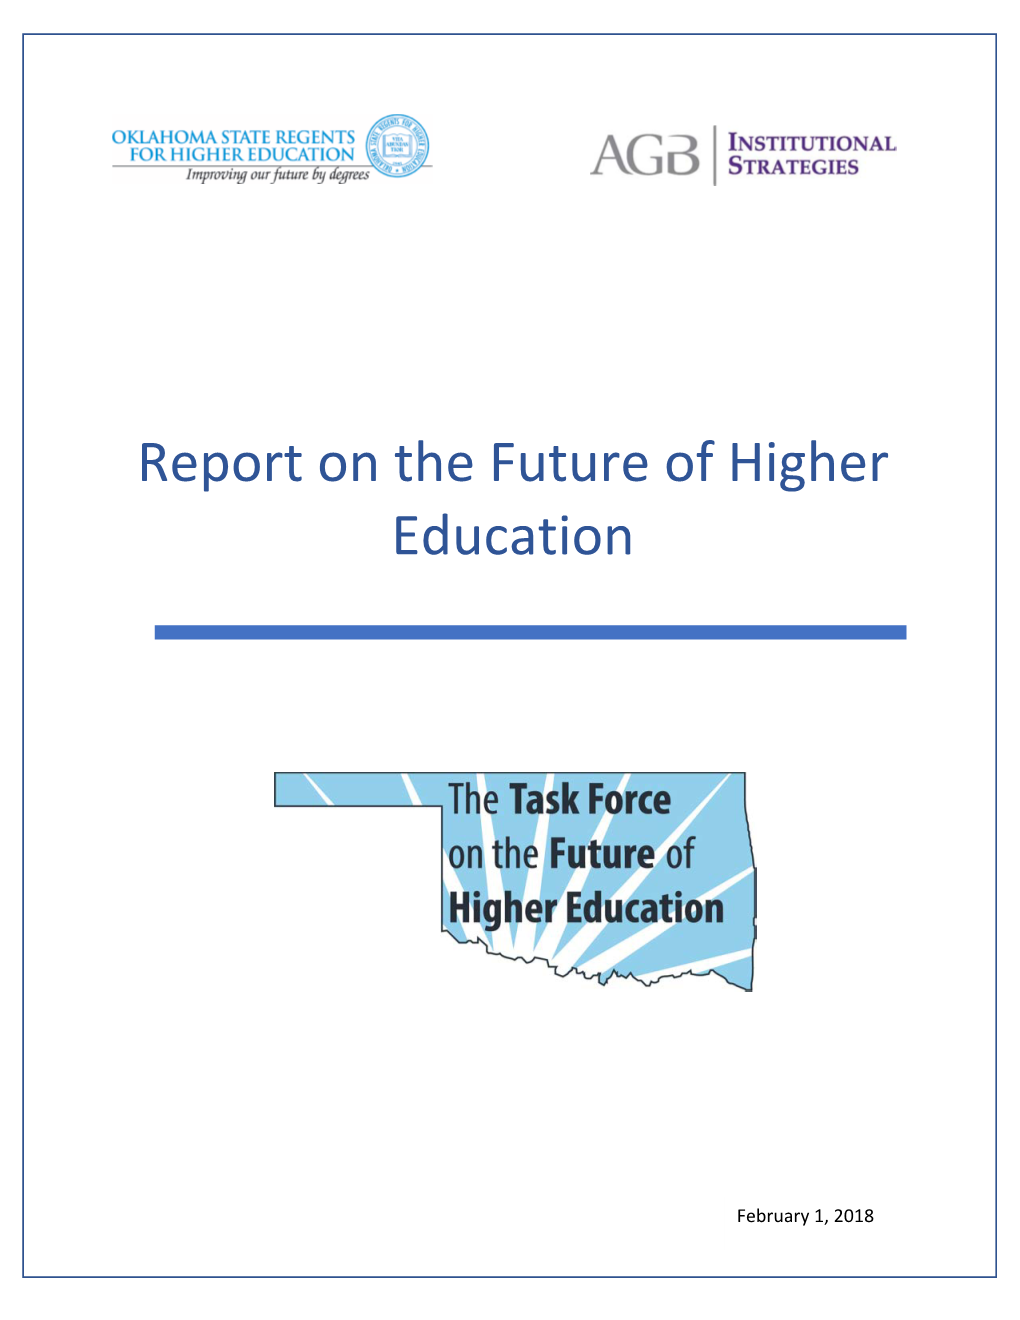 Report of the Task Force on the Future of Higher Education